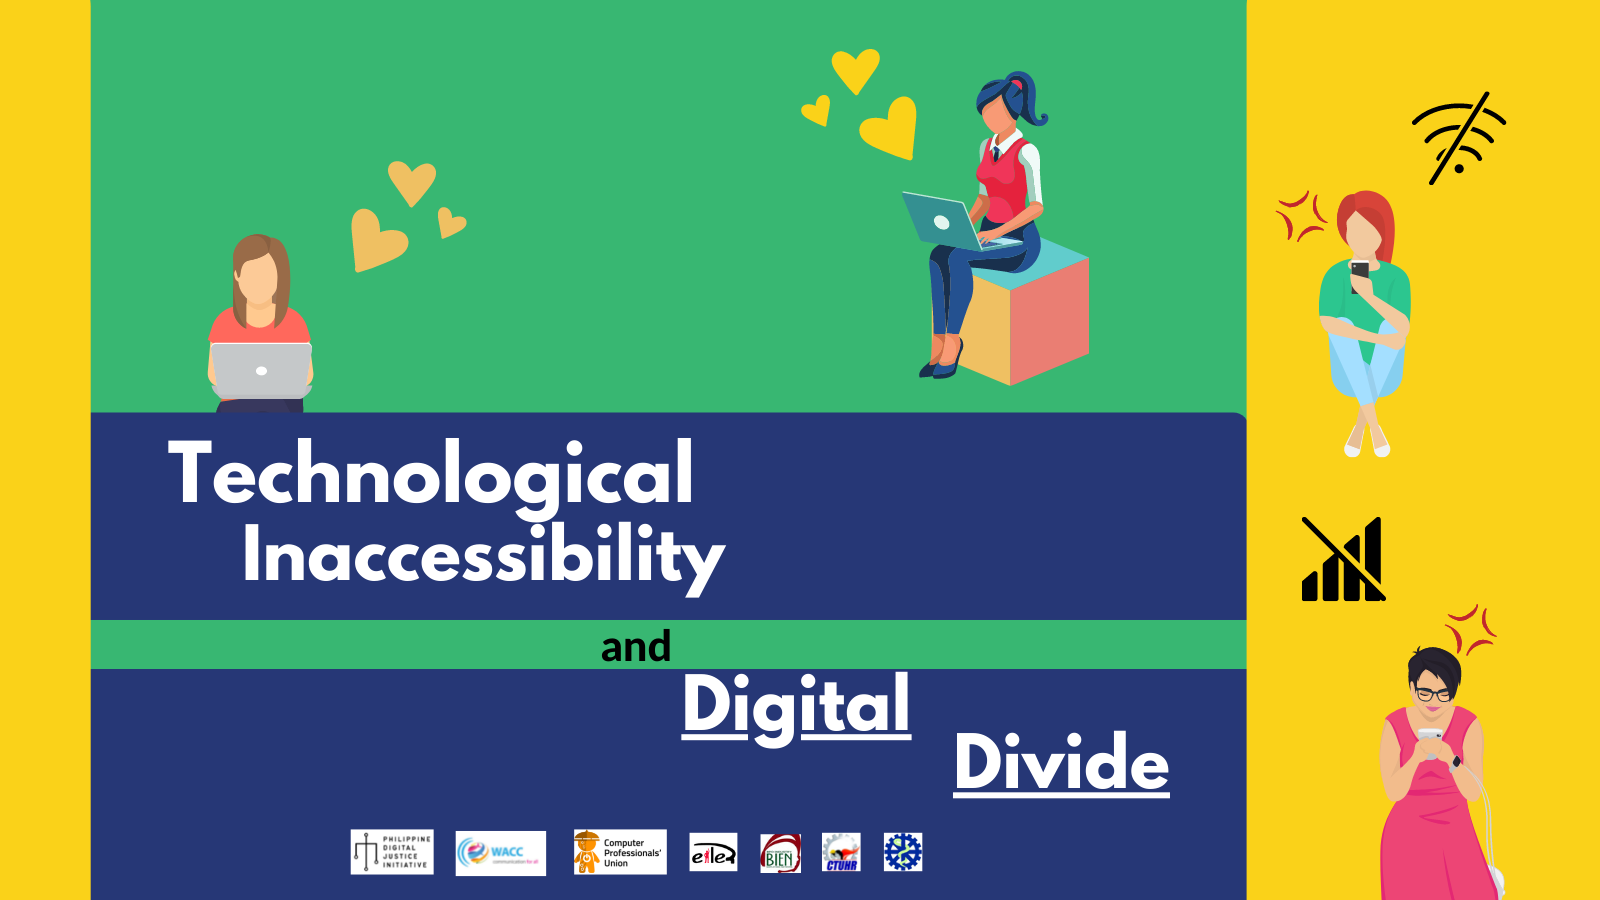 Technological Inaccessibility and Digital Divide